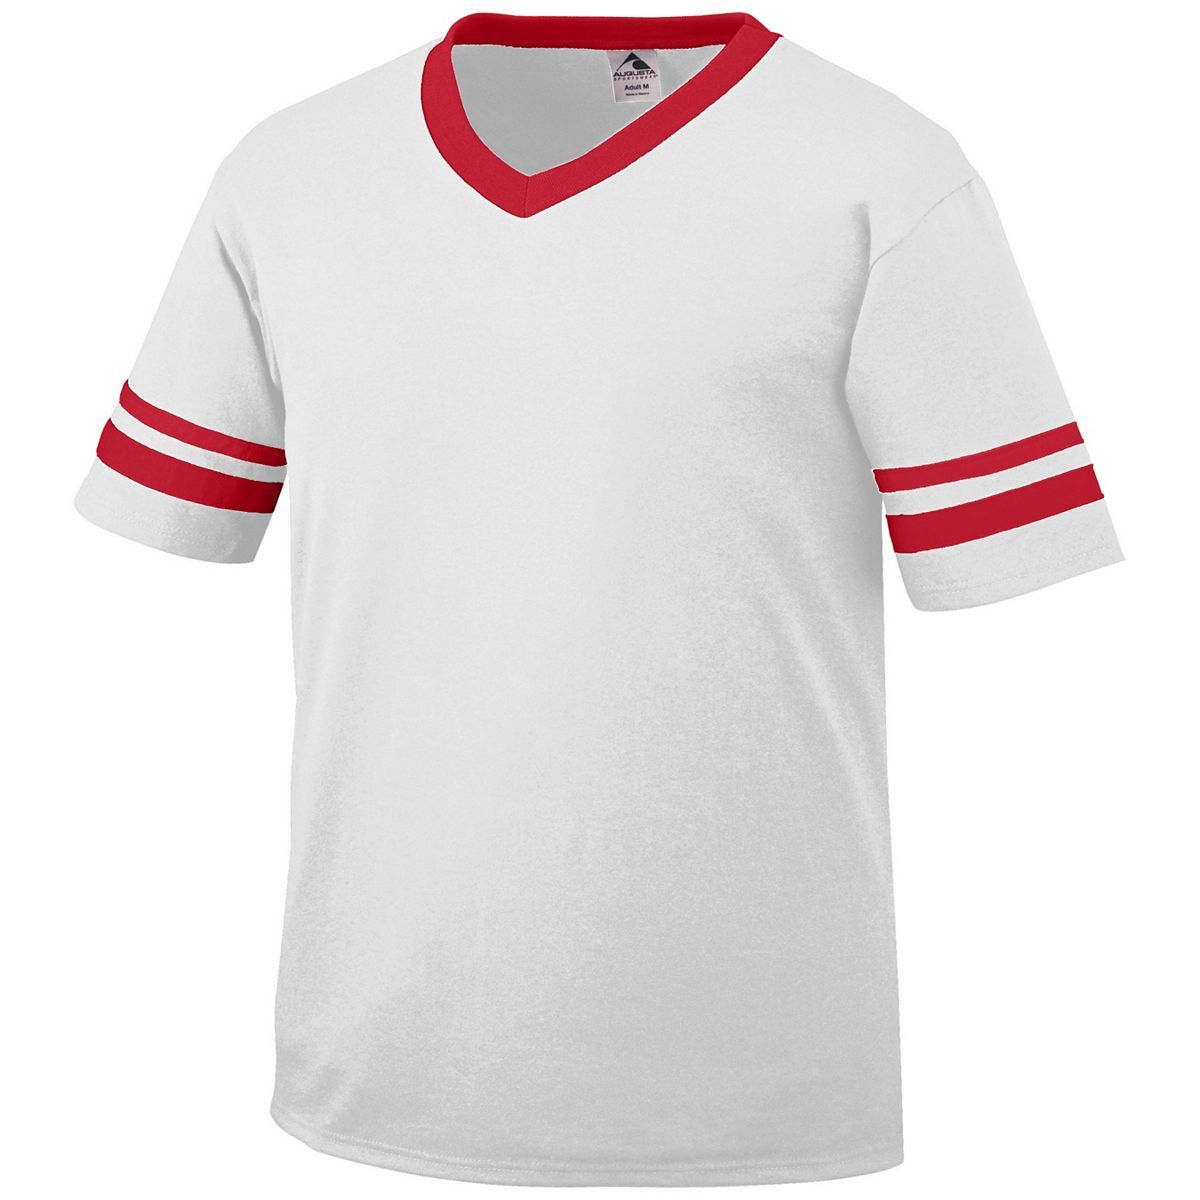 Augusta Sportswear Youth Sleeve Stripe Jersey in White/Red  -Part of the Youth, Youth-Jersey, Augusta-Products, Shirts product lines at KanaleyCreations.com